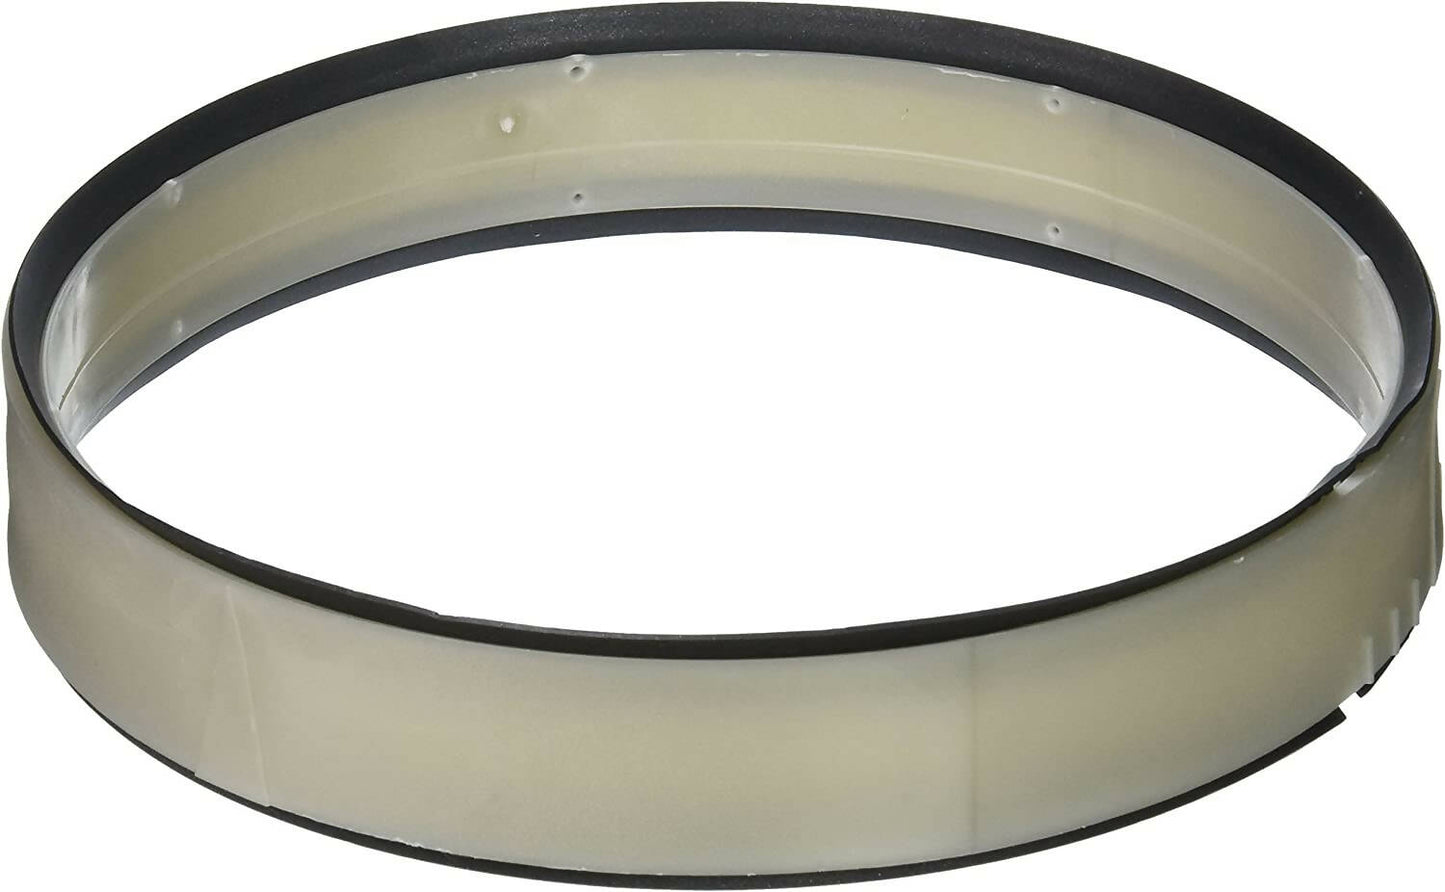 Frigidaire Top Load Washer Snubber Ring - 5308002385, Replaces: 00635162 08002385 130789 3161130 5303921508 635162 77025 8002385 AH473378 OEM PARTS WORLD